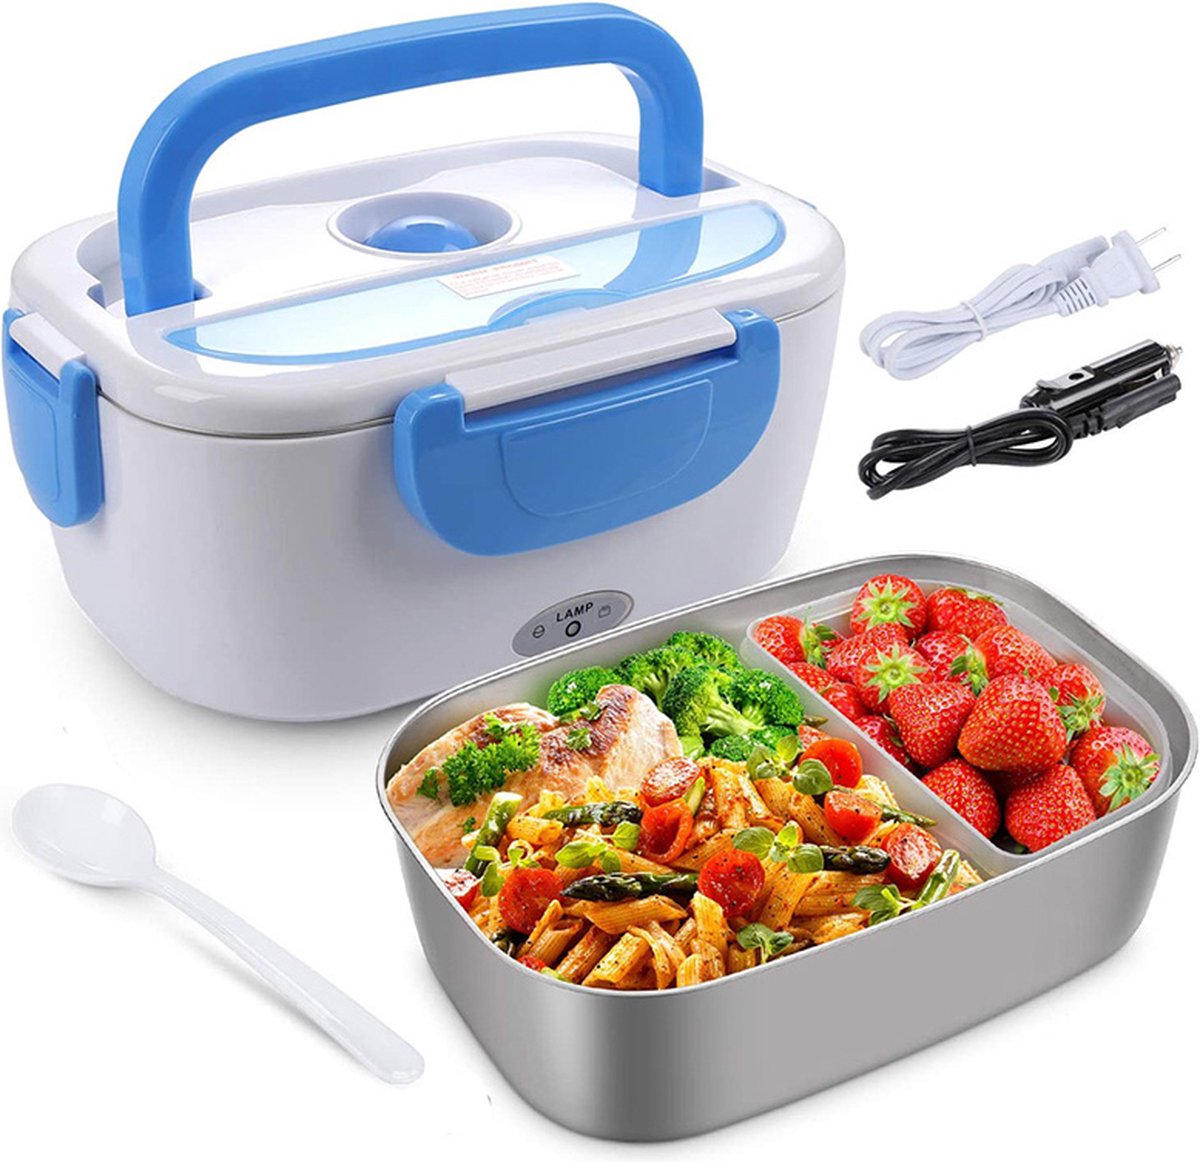 110V/12V Portable Stainless Steel Heating Container - bag included, Food  Warmer